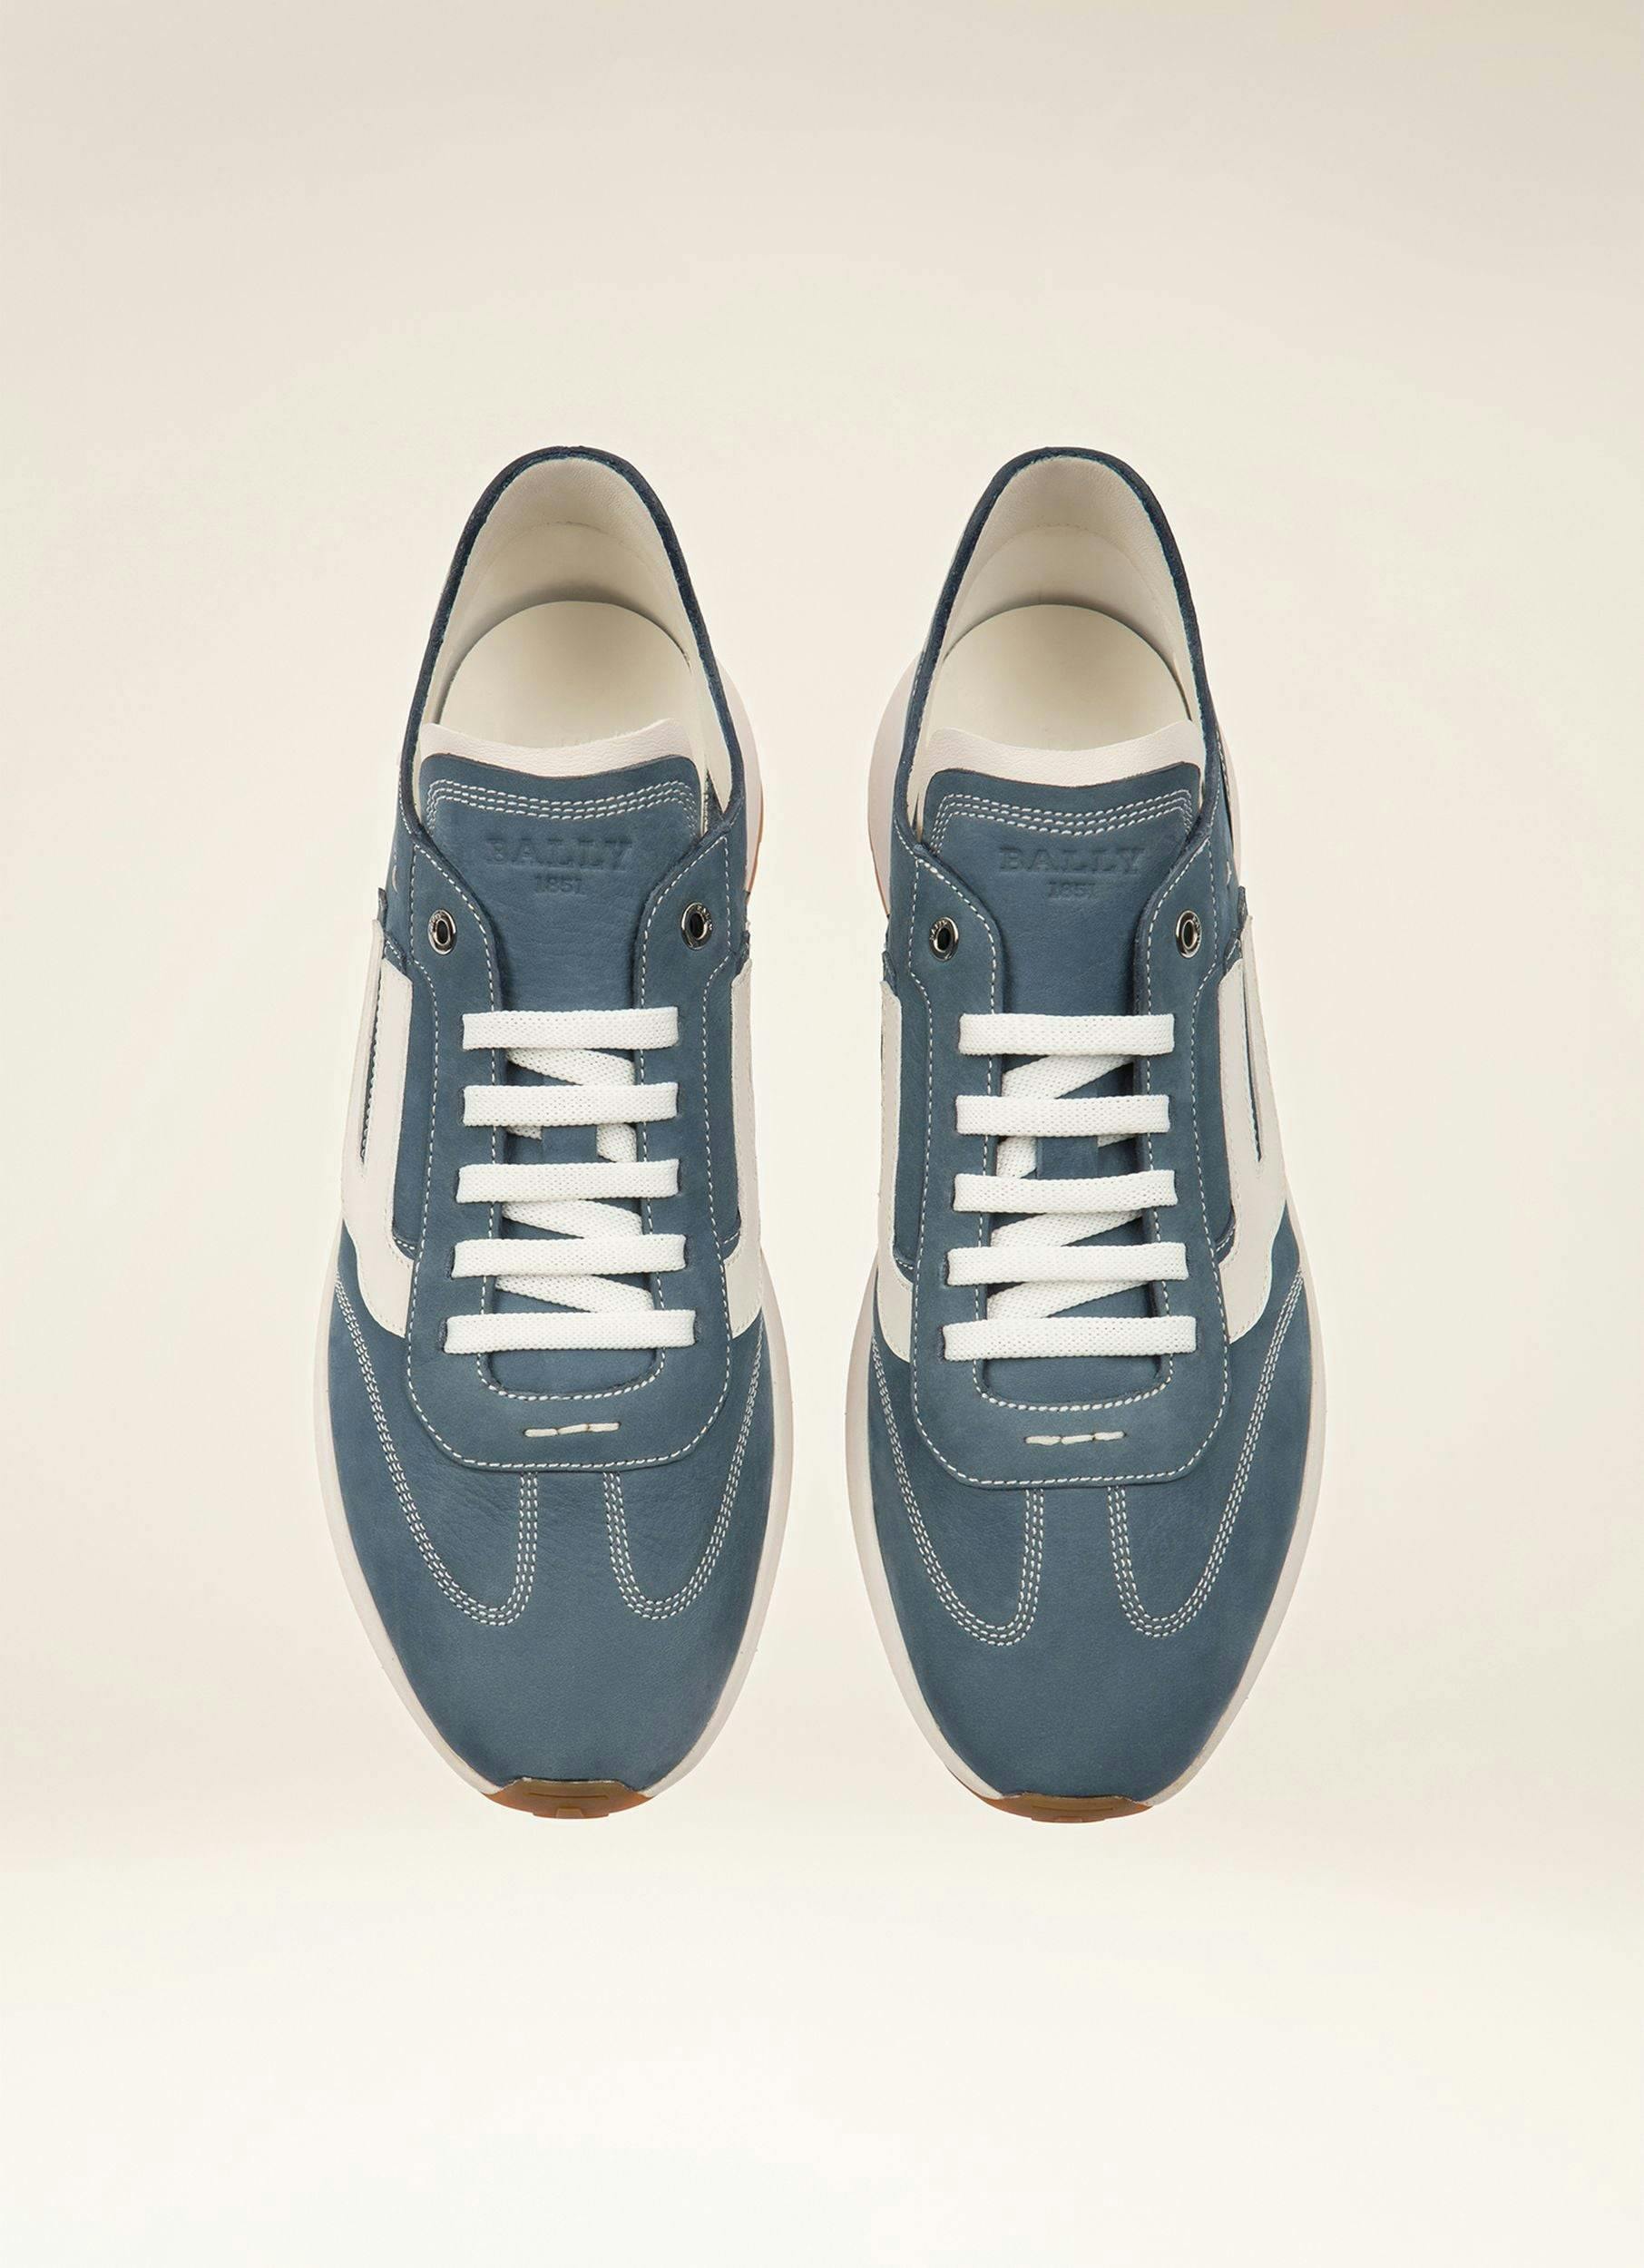 OUTLINE Leather Sneakers In Blue & White - Men's - Bally - 04